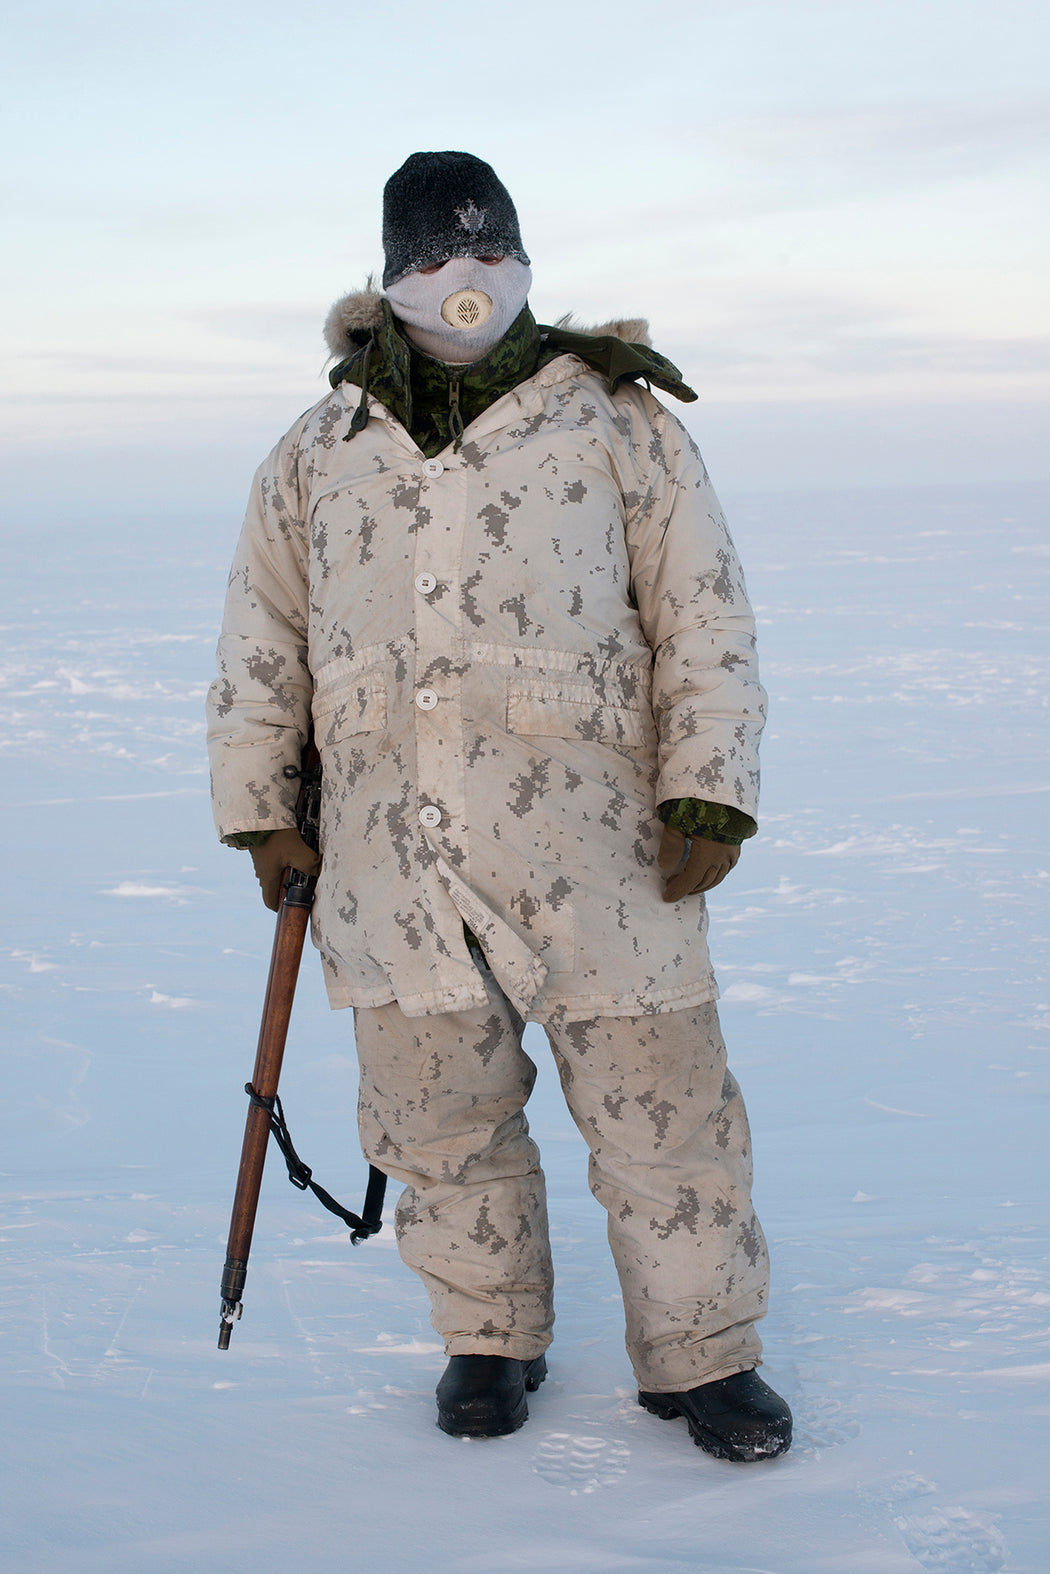 A Canadian Arctic Operations Advisor seen on a reconnaissance patrol in the High Arctic near Resolute Bay in Nunavut, Canada, at temperatures below -50 degrees (-58 F) with the windchill in the High Arctic